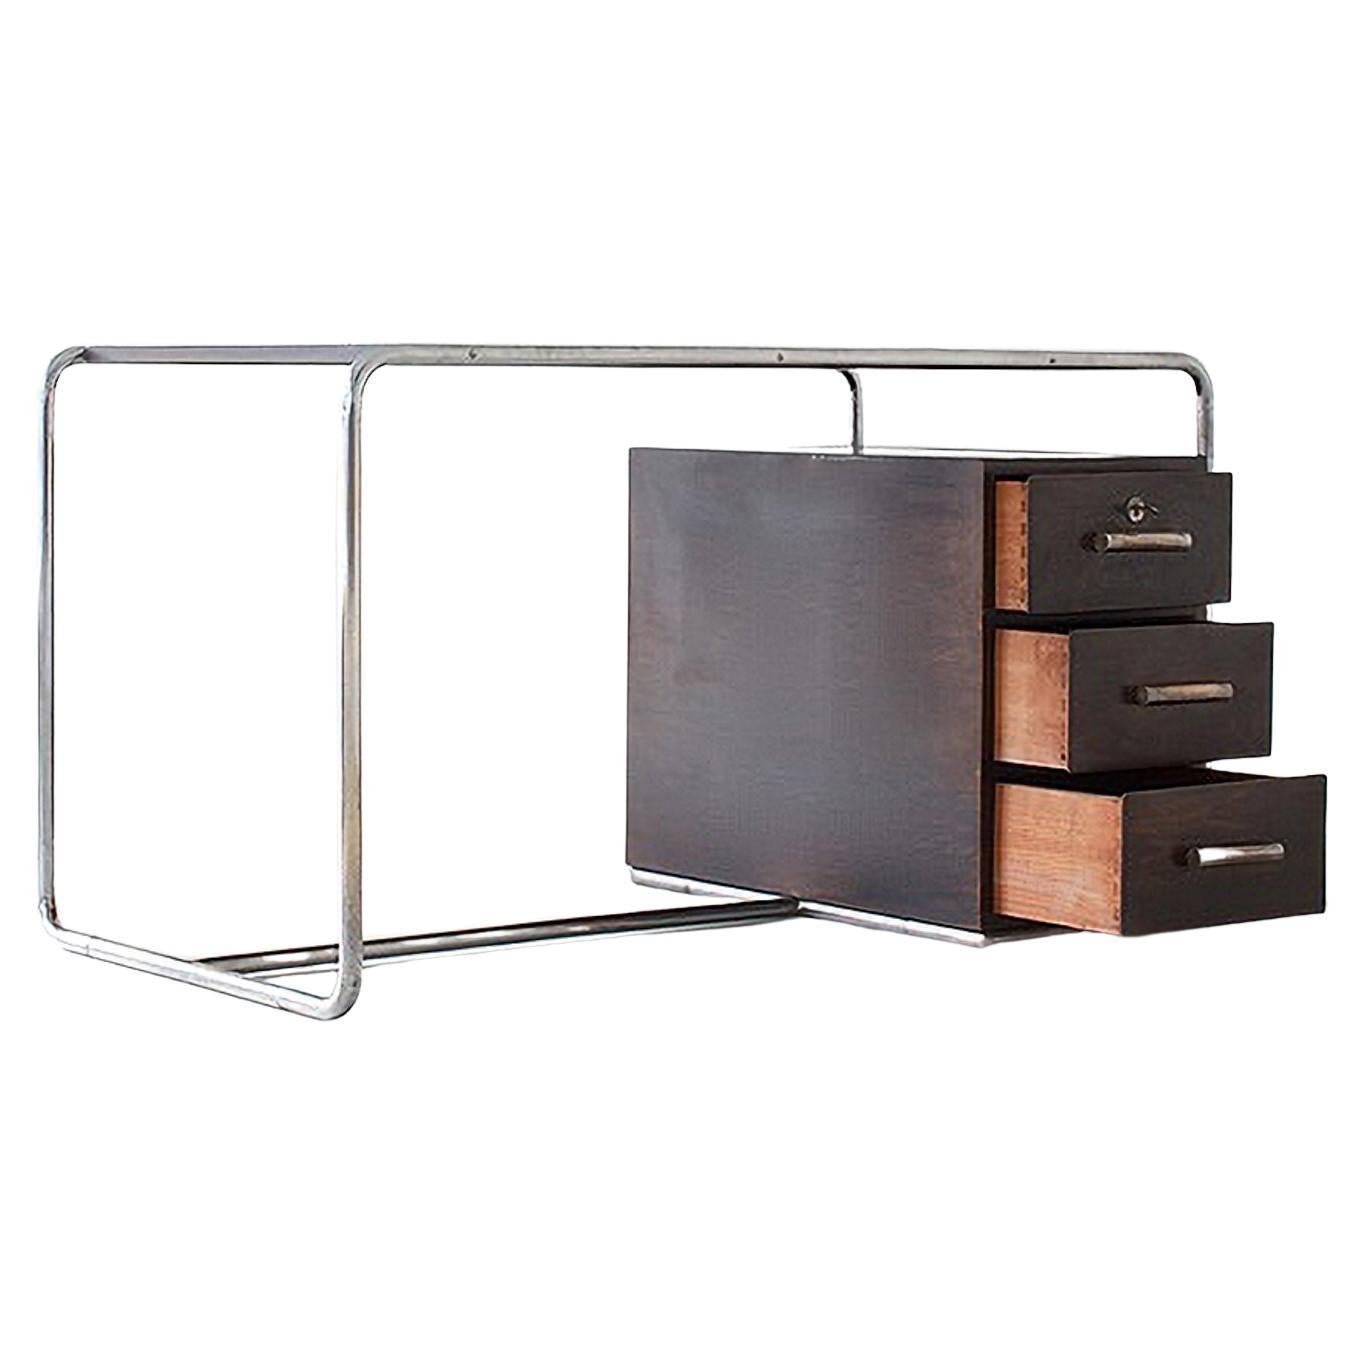 Bauhaus Tubular Steel Desk by Bruno Weil for Thonet, Stained Wood, Germany, 1930 For Sale